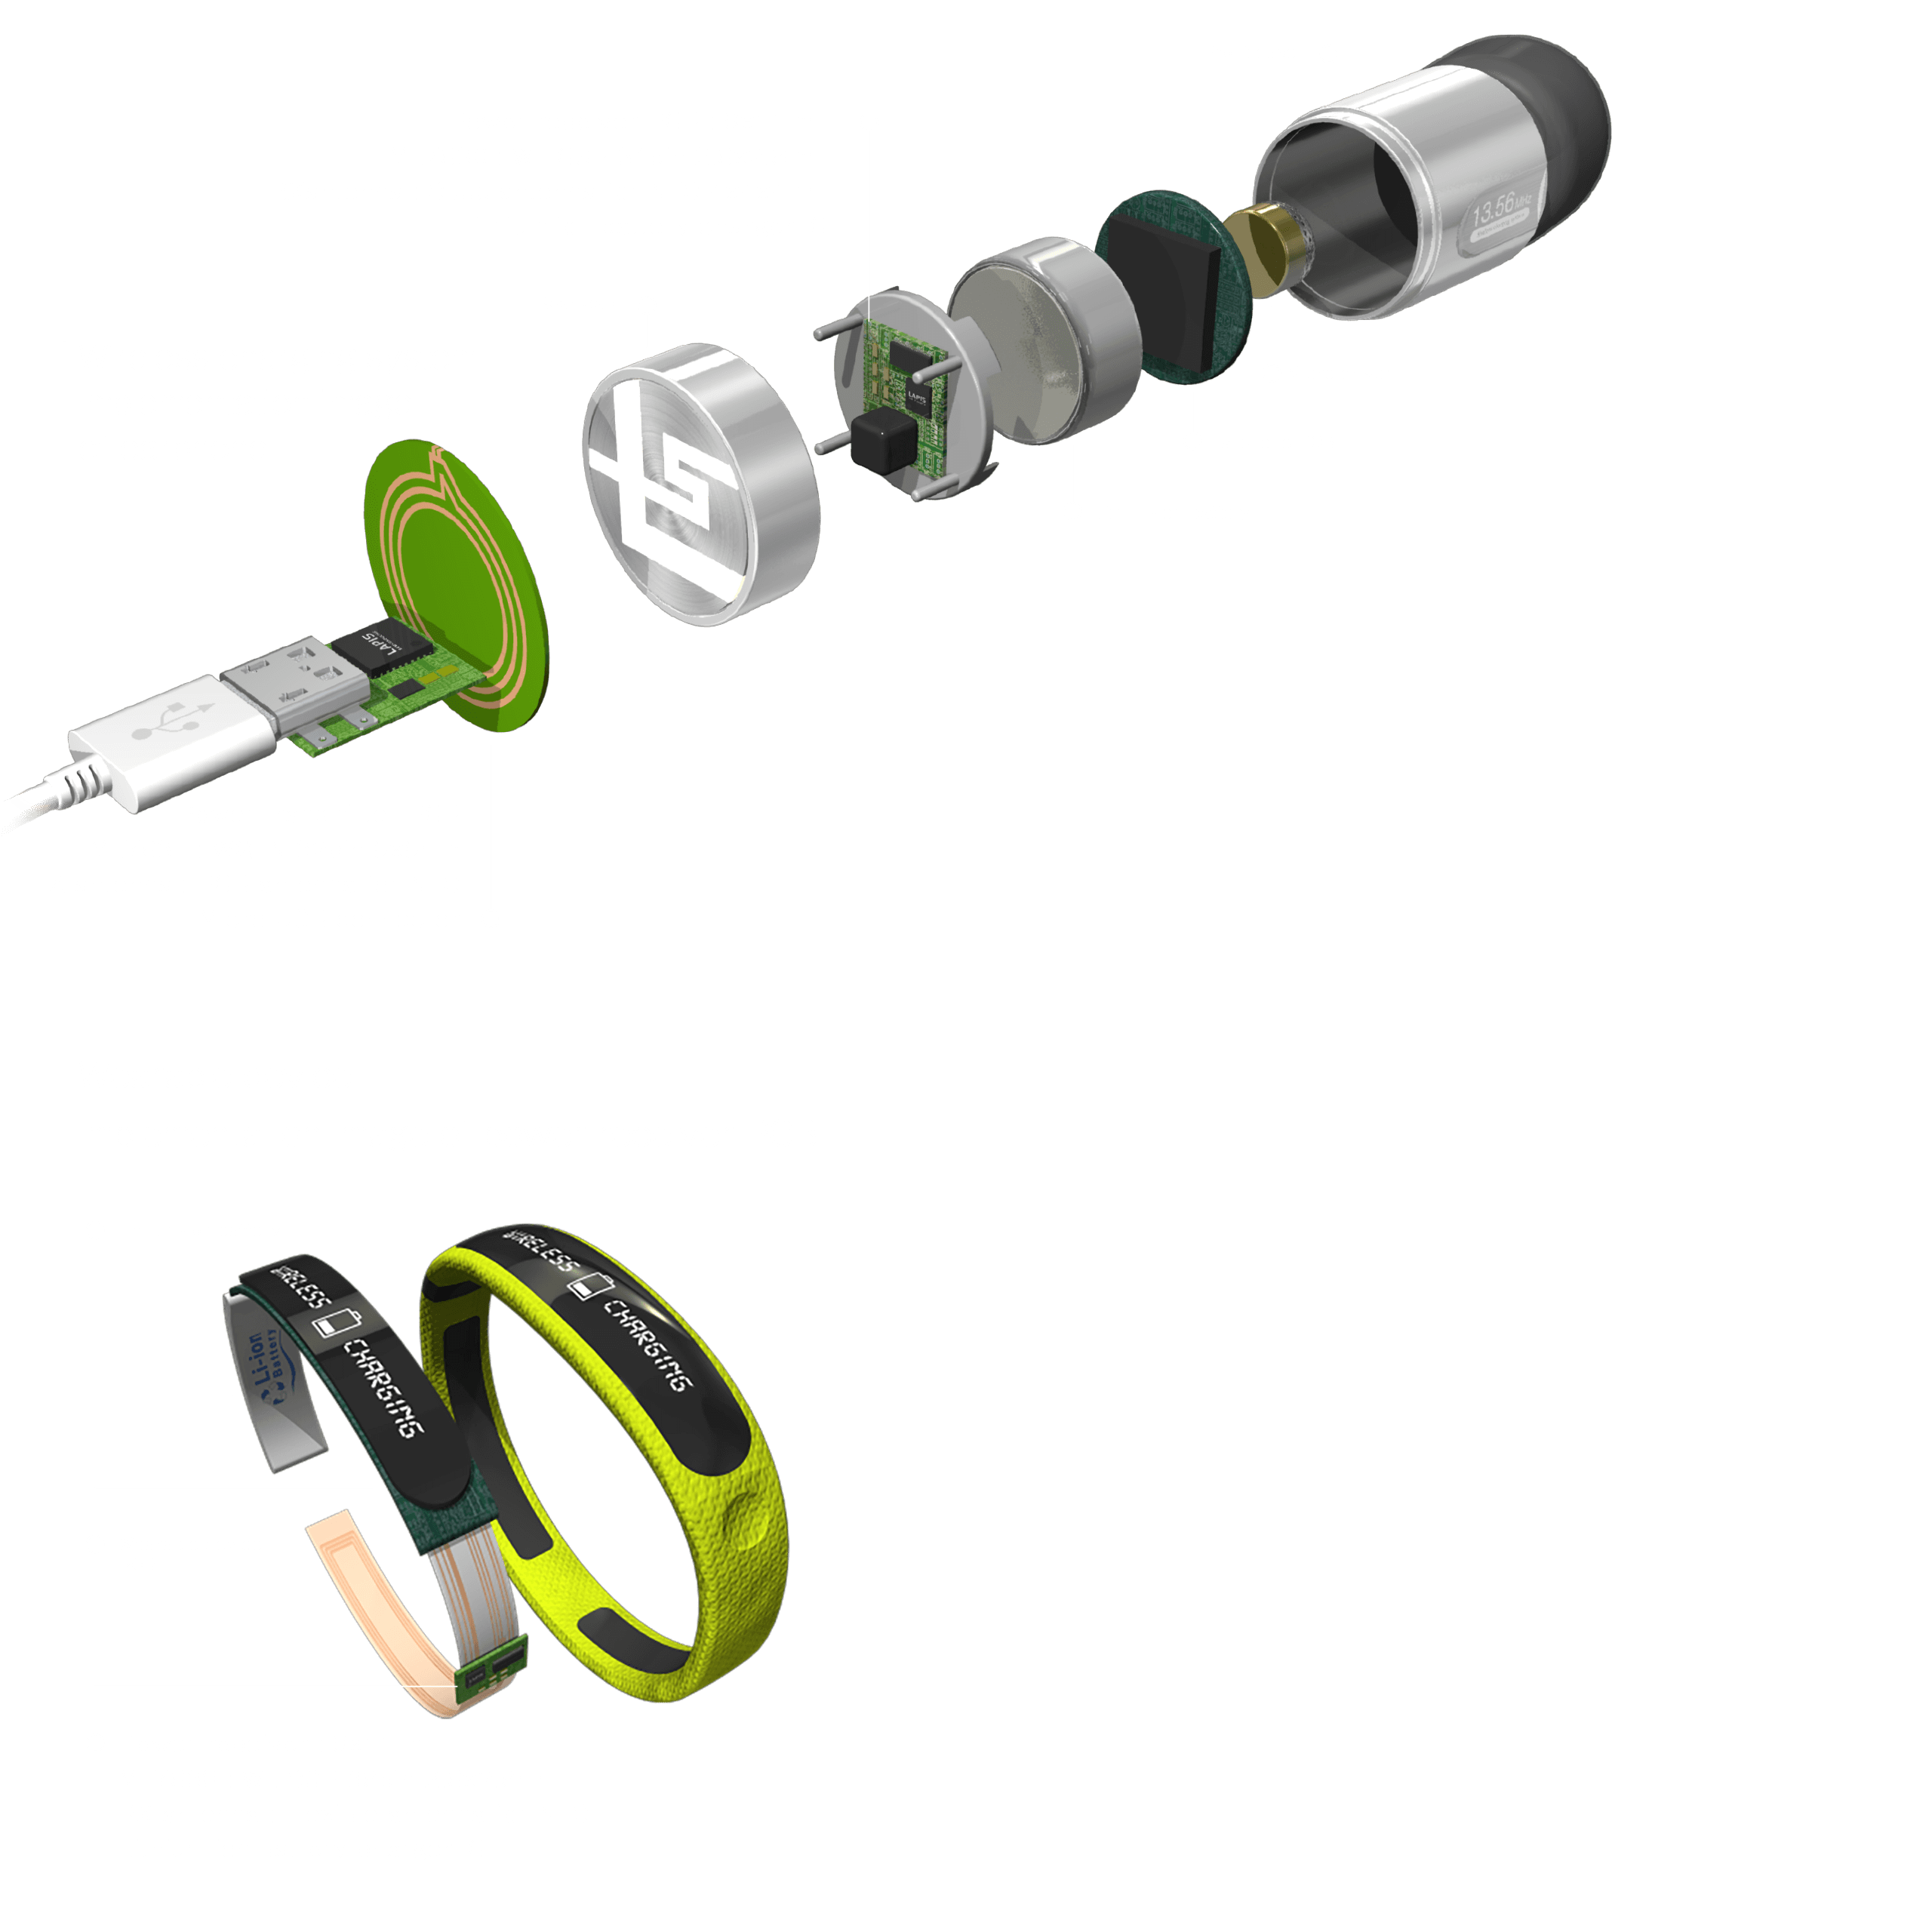 13.56MHz Wireless charging system implementation image